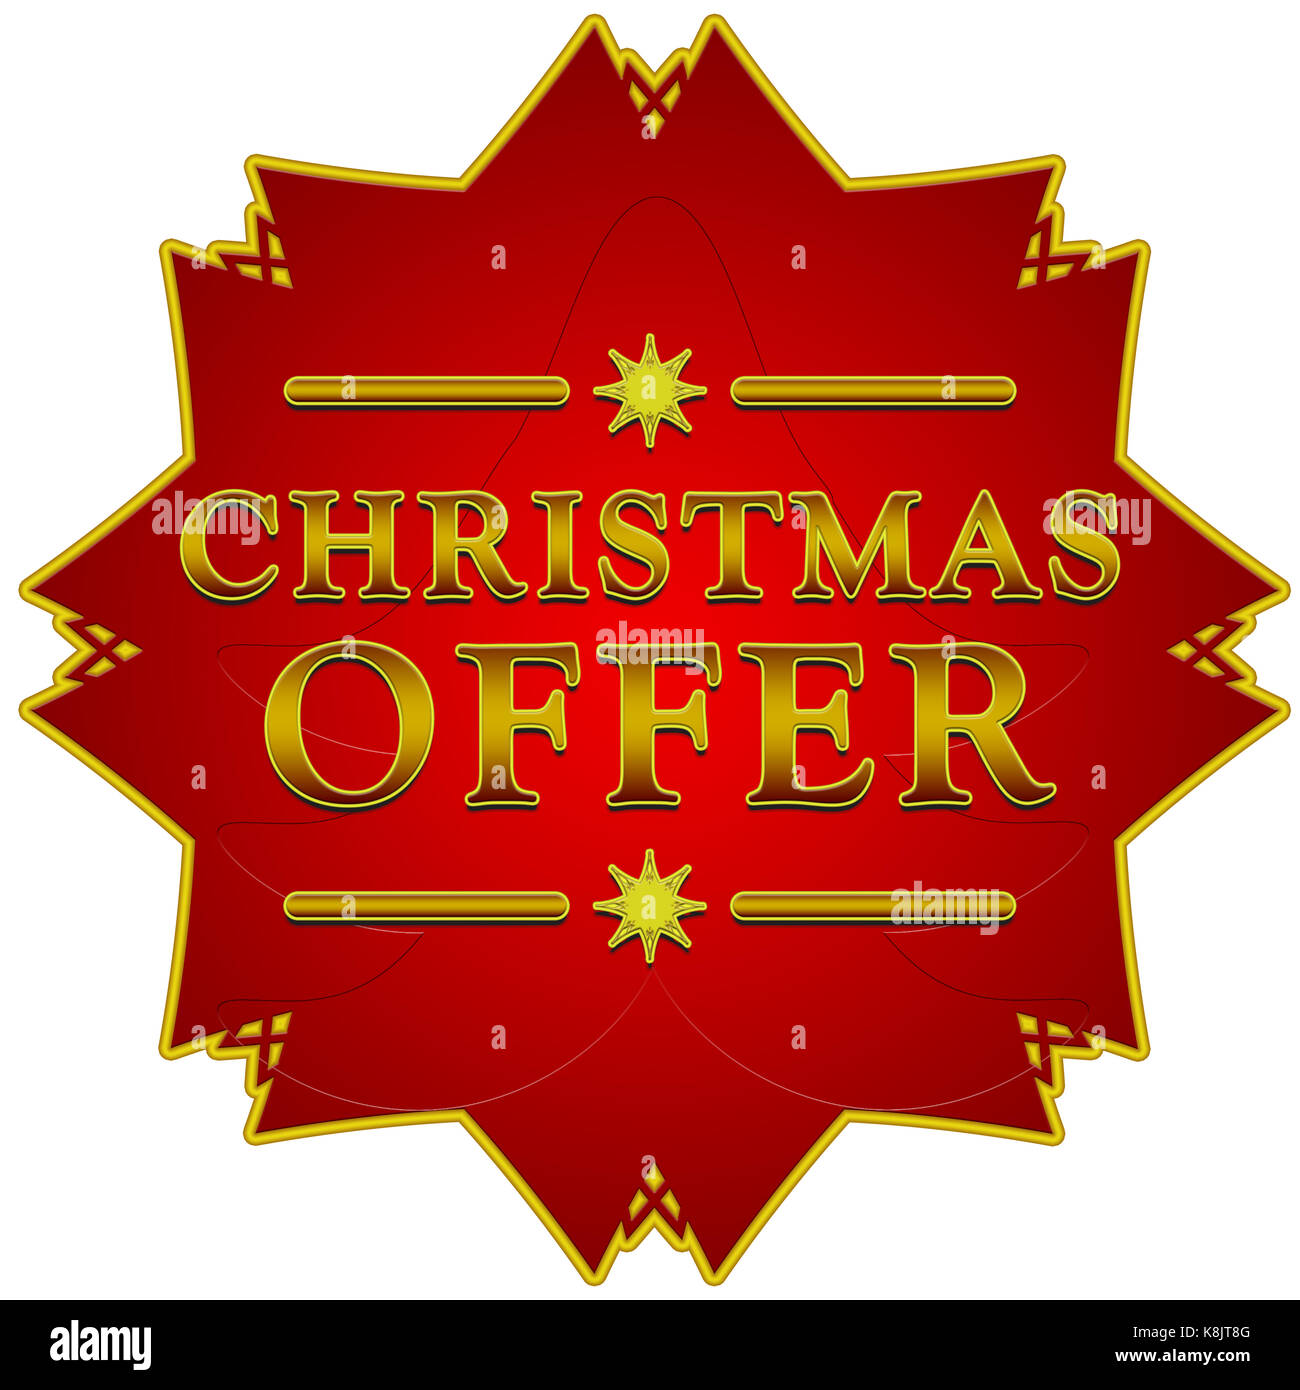 Red christmas offer label - decorative star on white background with golden text Stock Photo